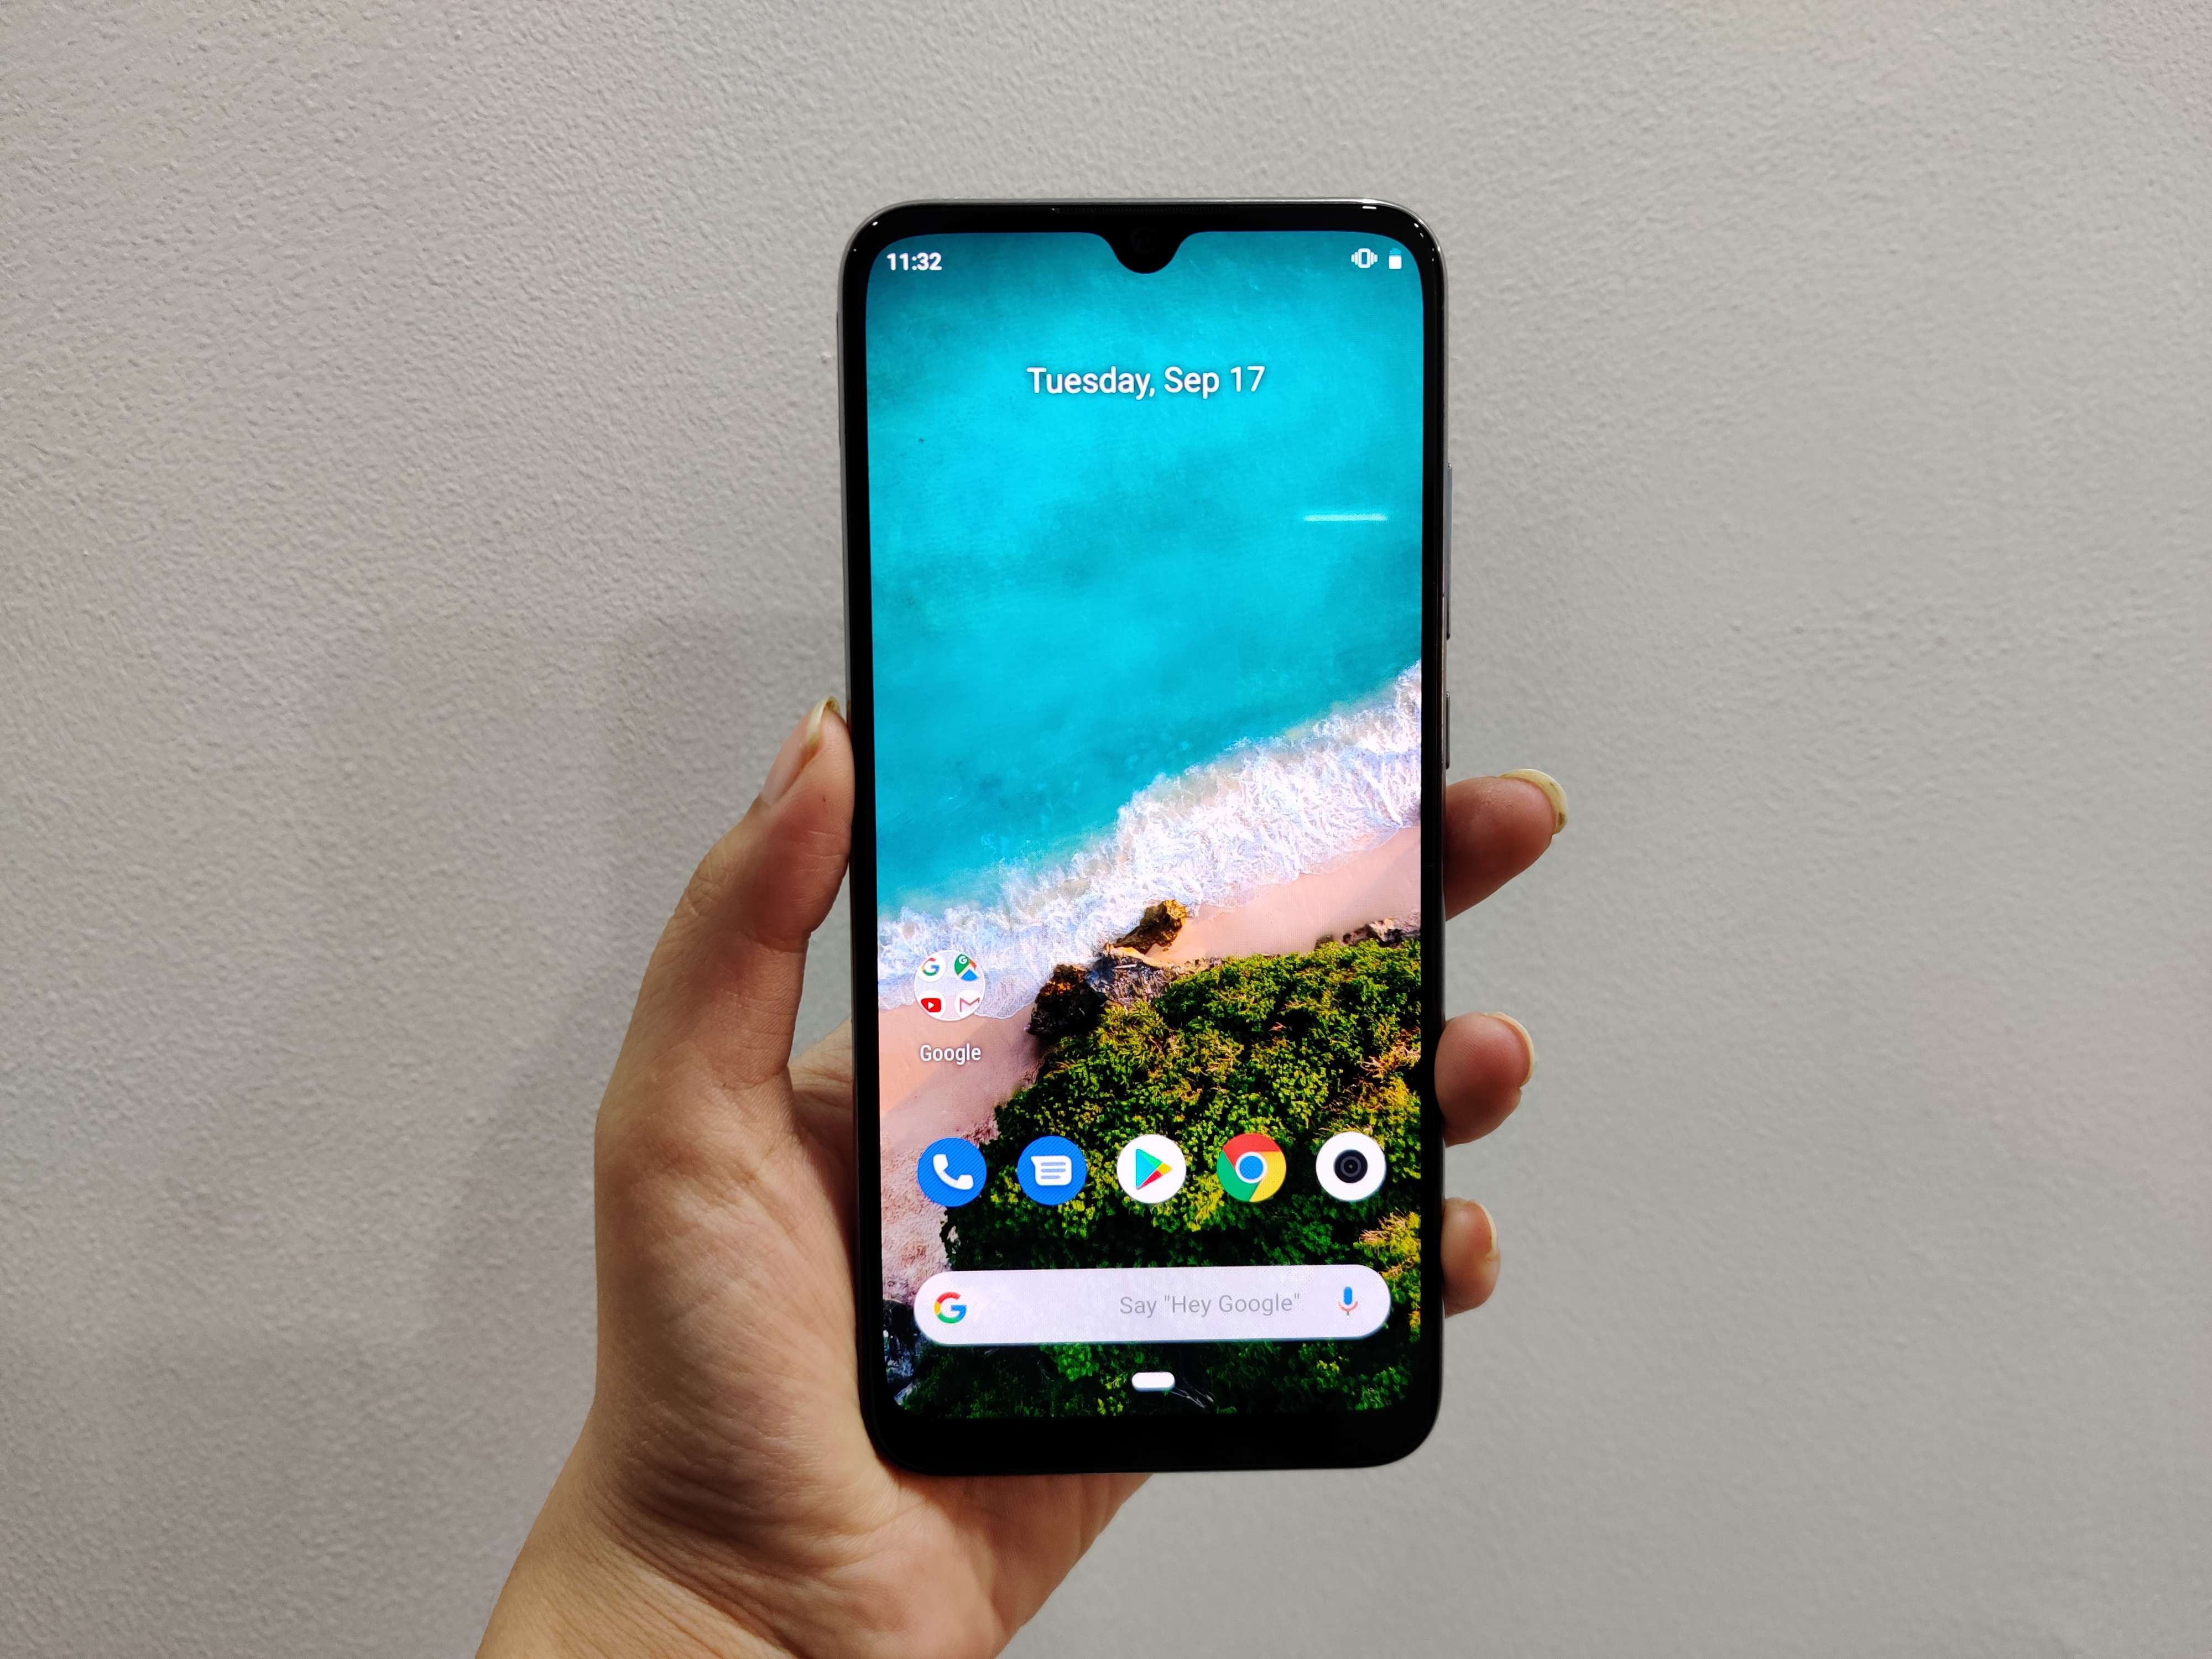 Xiaomi a2 3 64 гб. Xiaomi mi a3. Xiaomi mi a3 64gb. Смартфон Xiaomi mi a3 128gb. Xiaomi mi a3 4/64gb Android one.